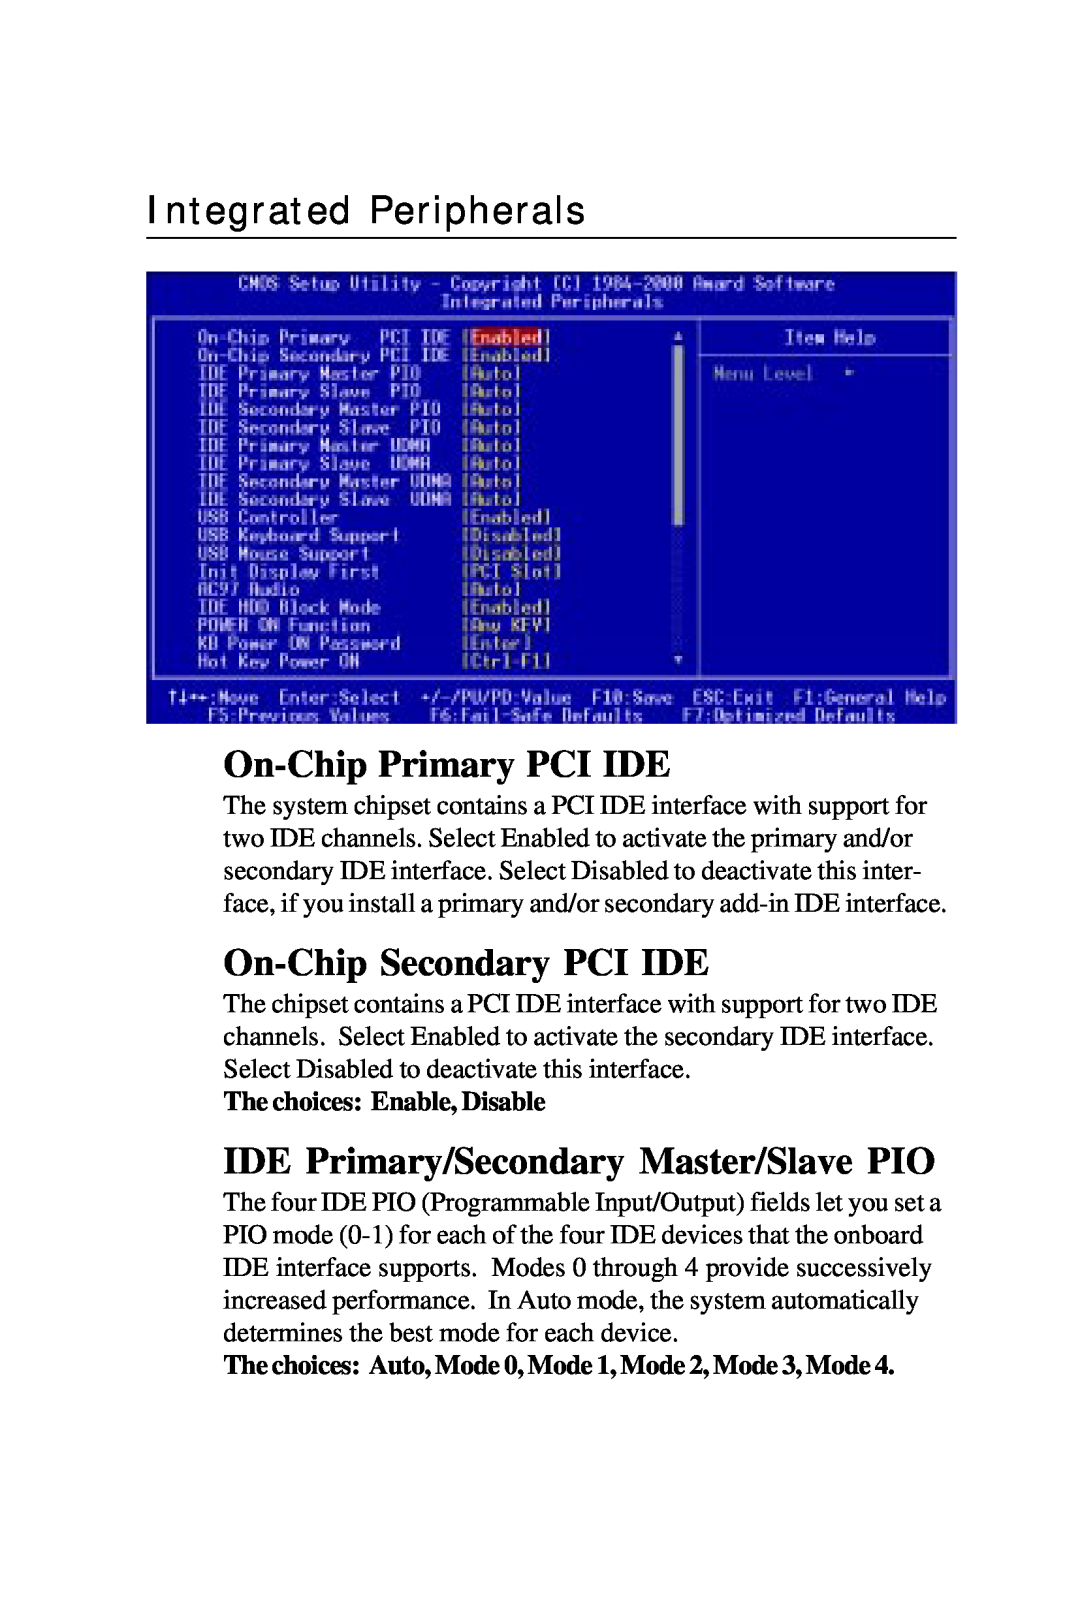 Intel PCM-6896 manual Integrated Peripherals, On-Chip Primary PCI IDE, On-Chip Secondary PCI IDE 